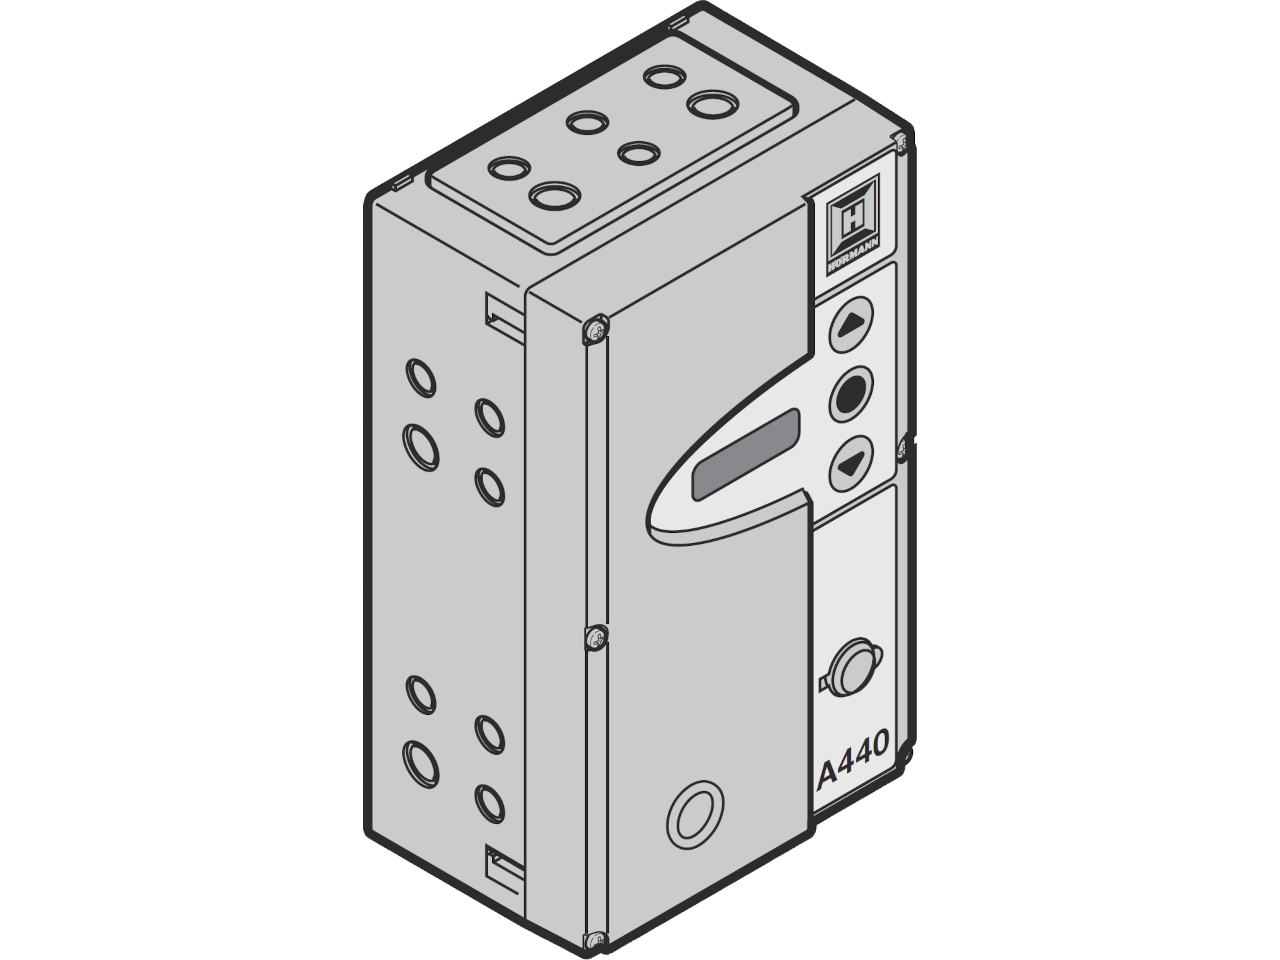 Hormann Door Control A 435 complete in Enclosure with main switch